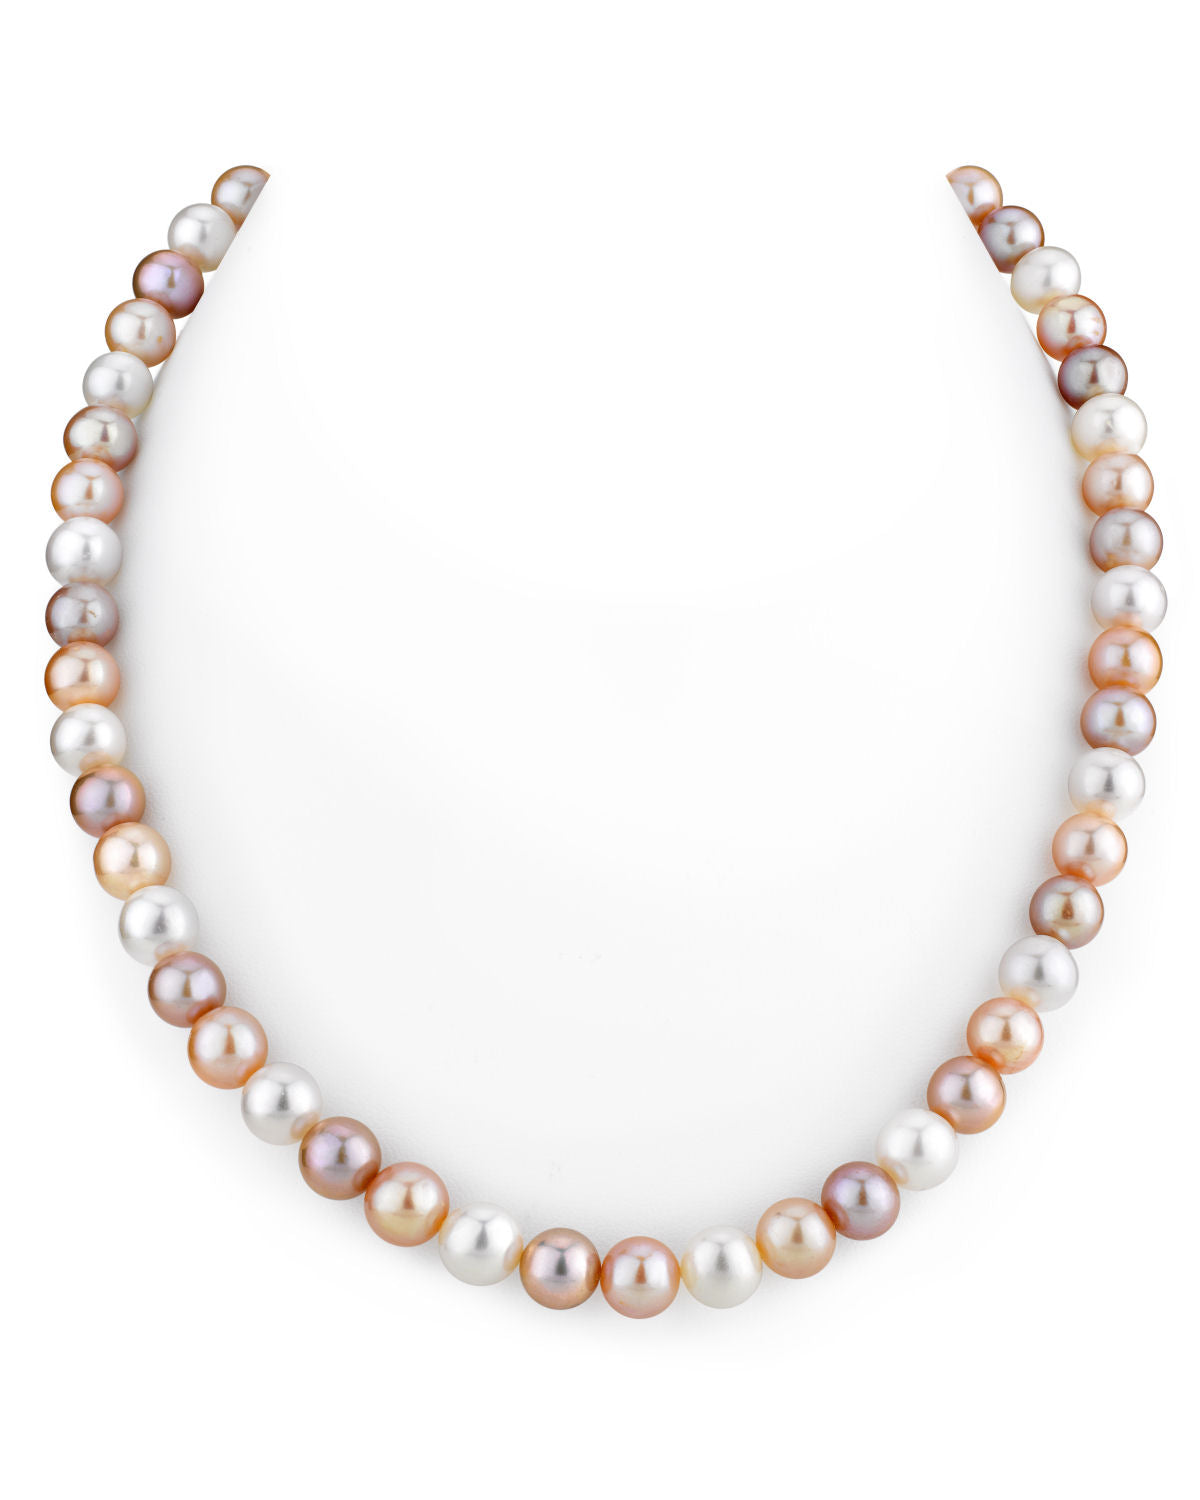 8.0-8.5mm Freshwater Multicolor Pearl Necklace - AAAA Quality